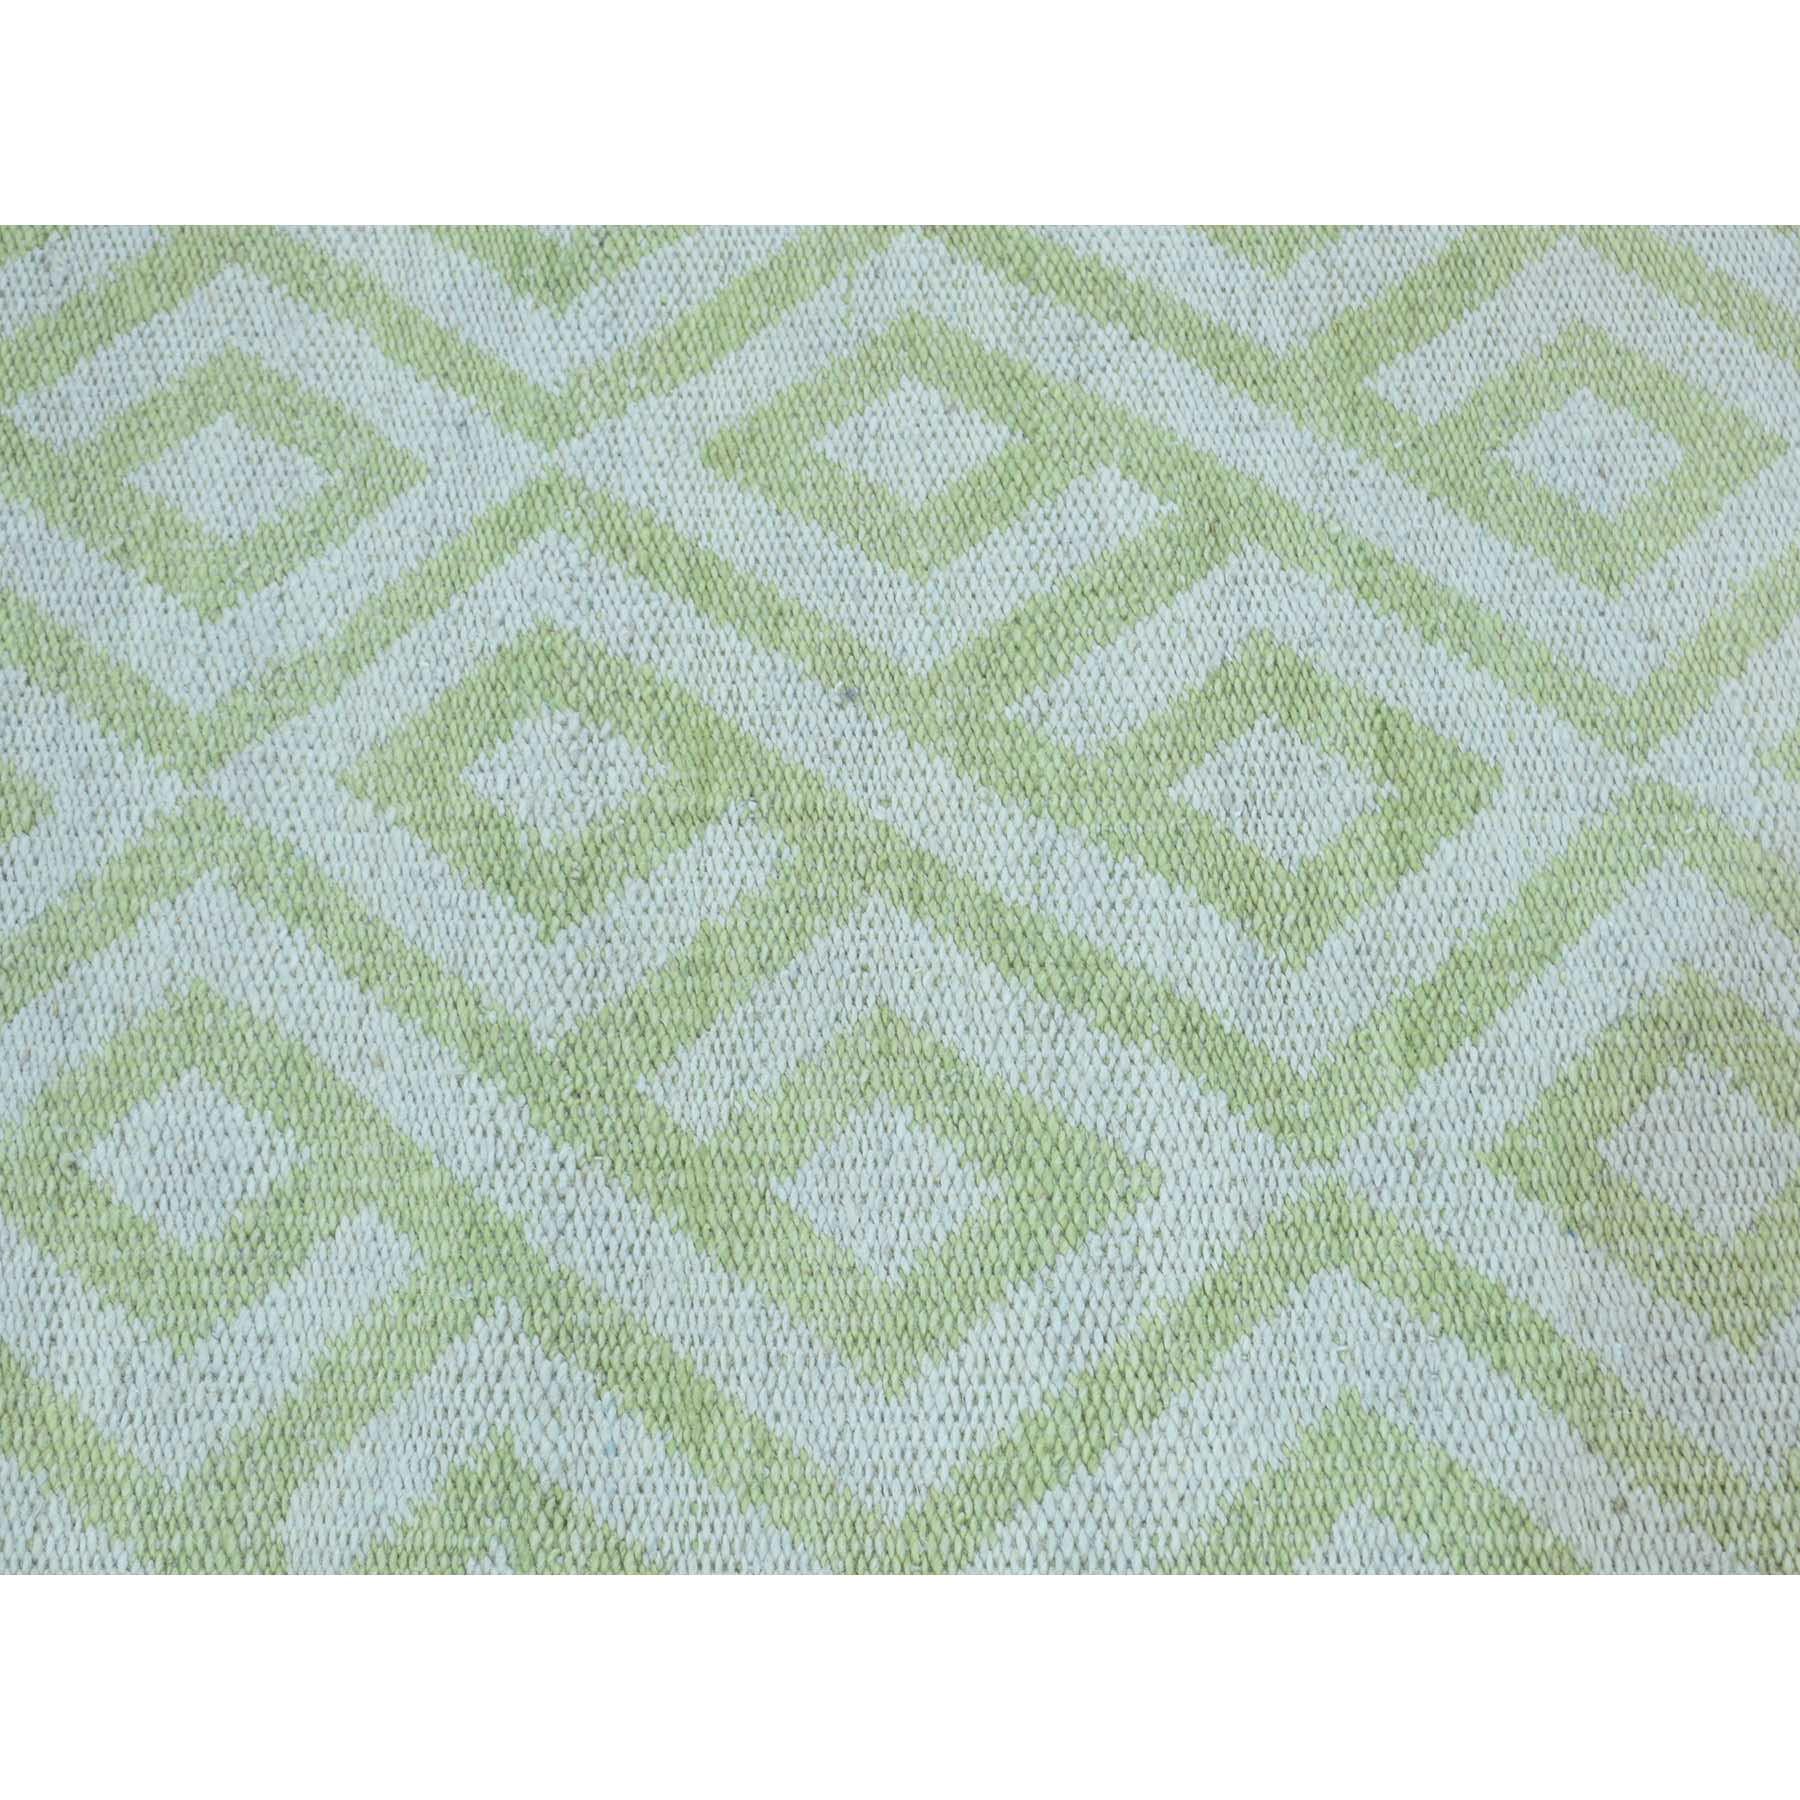 6-x6- Flat Weave Hand Woven Durie Kilim Reversible Square Rug 